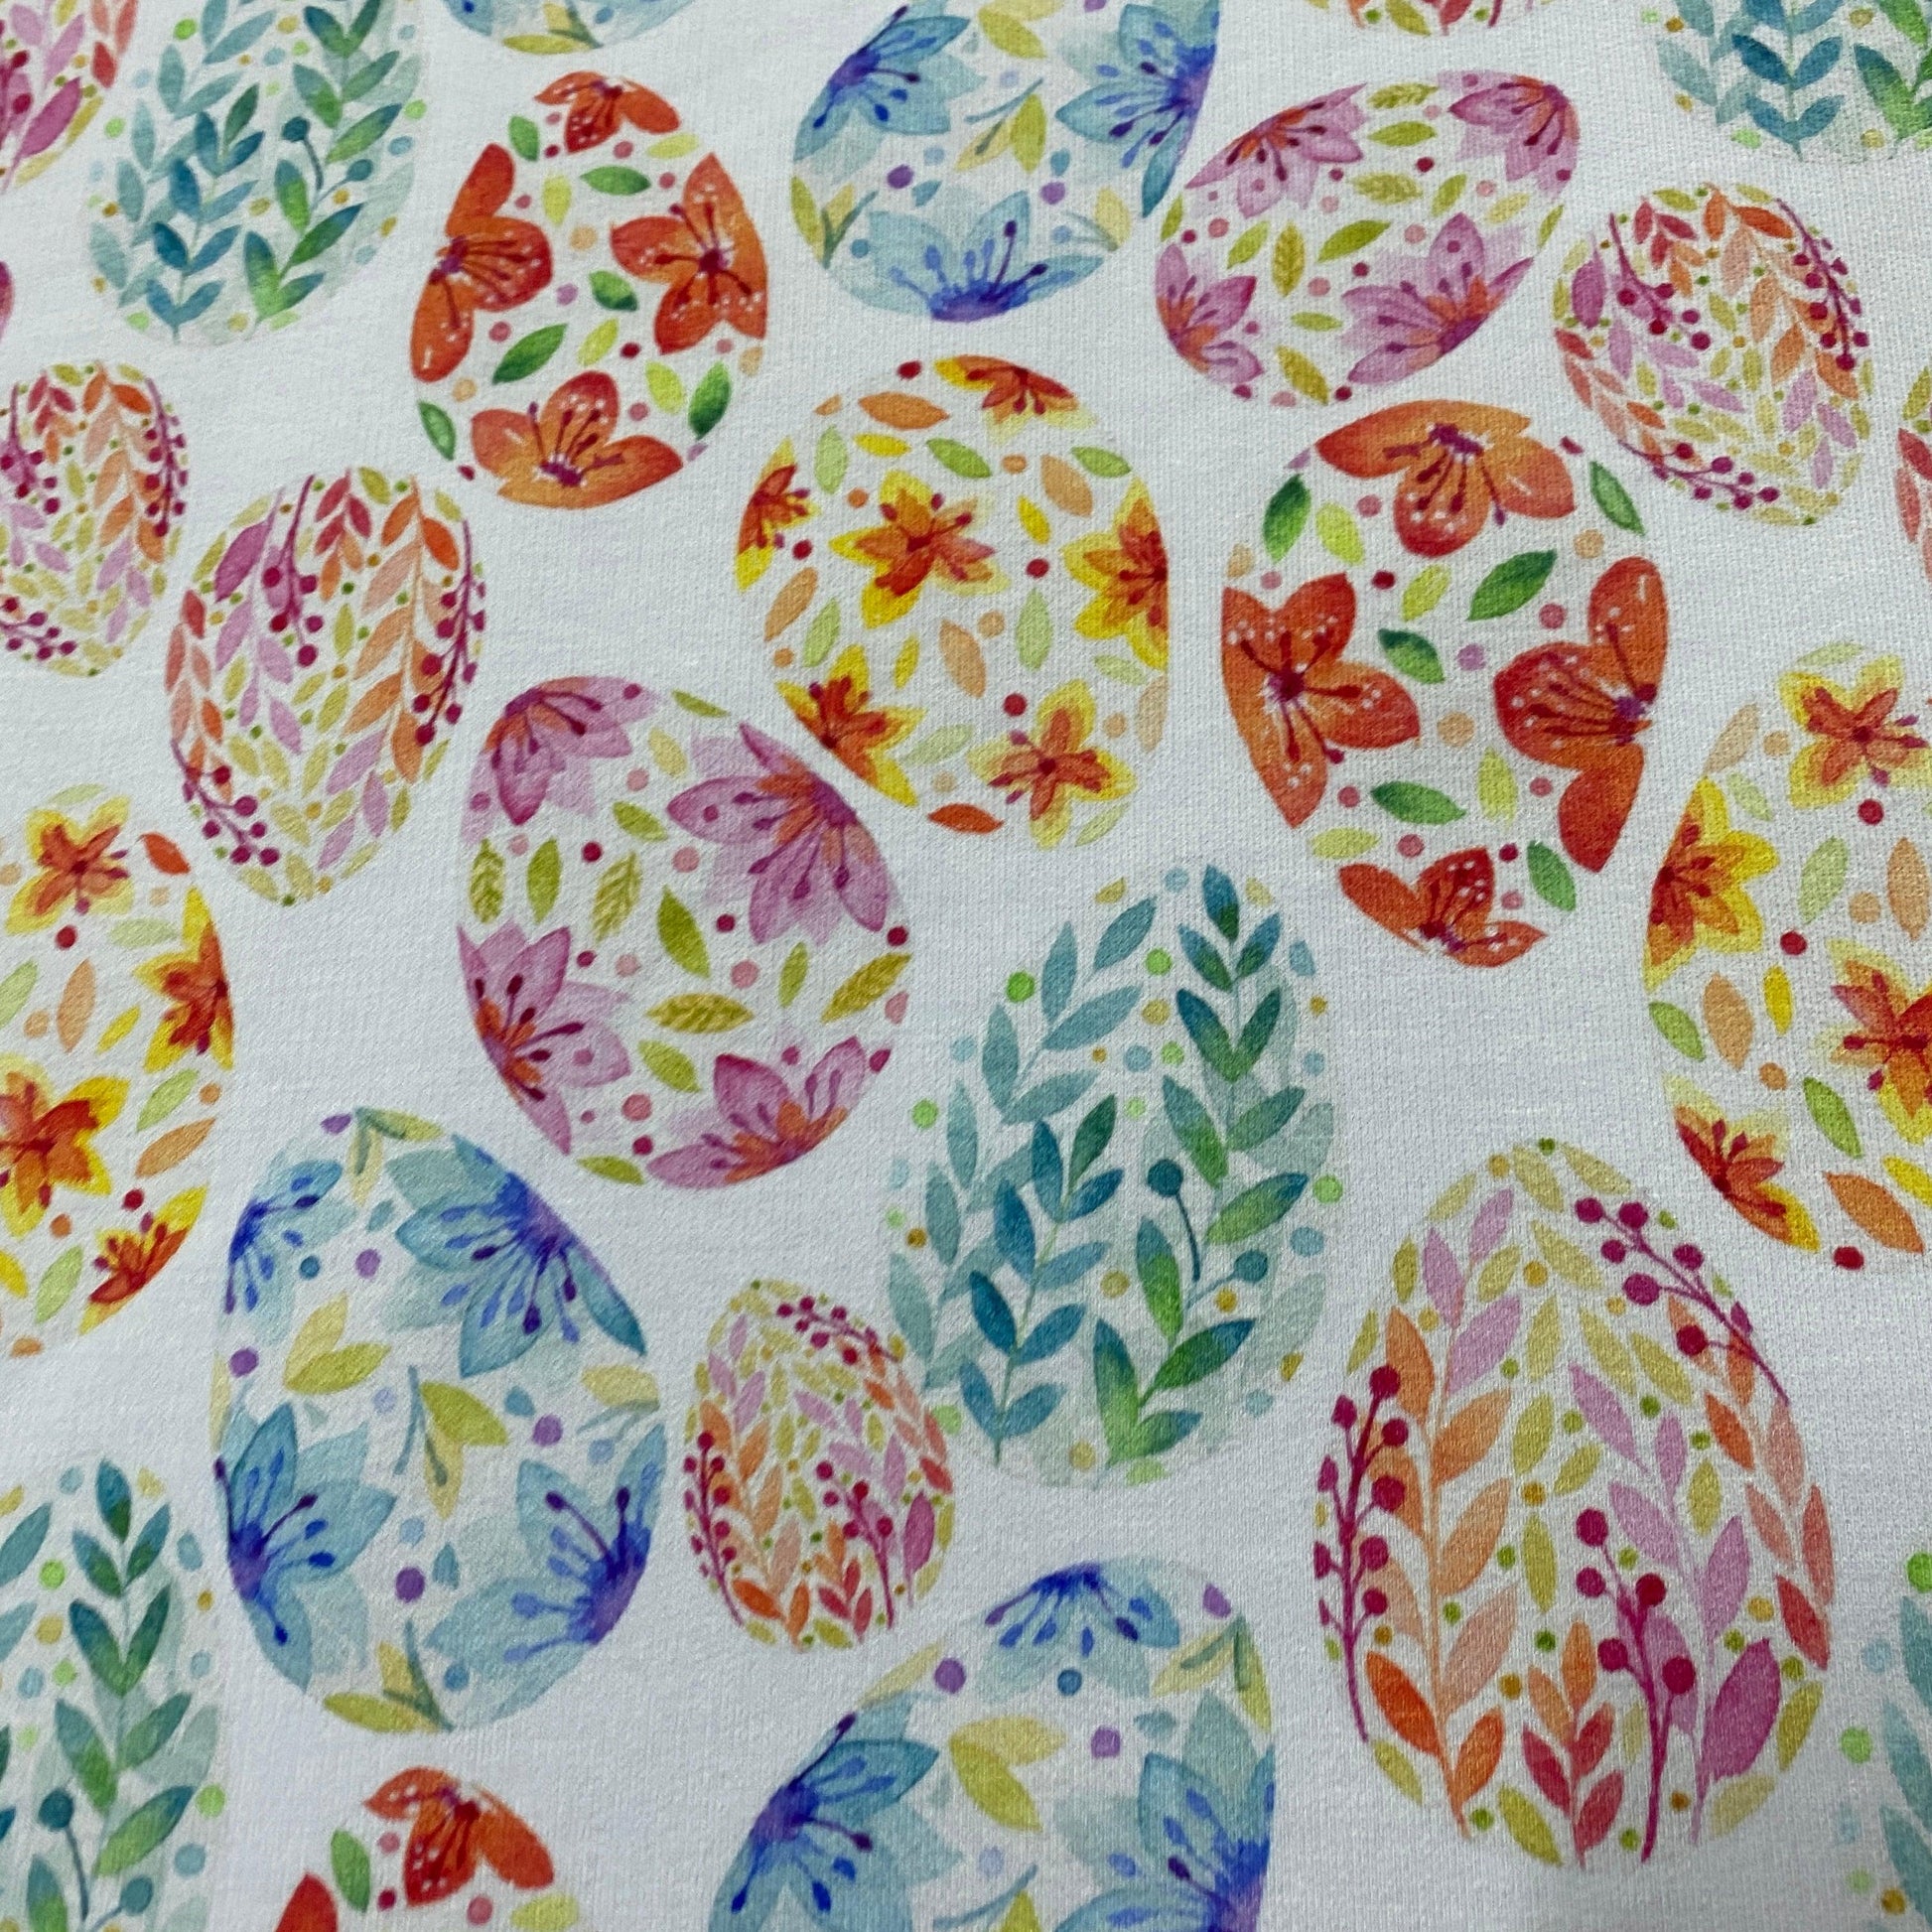 Floral Eggs on Bamboo/Spandex Jersey Fabric - Nature's Fabrics